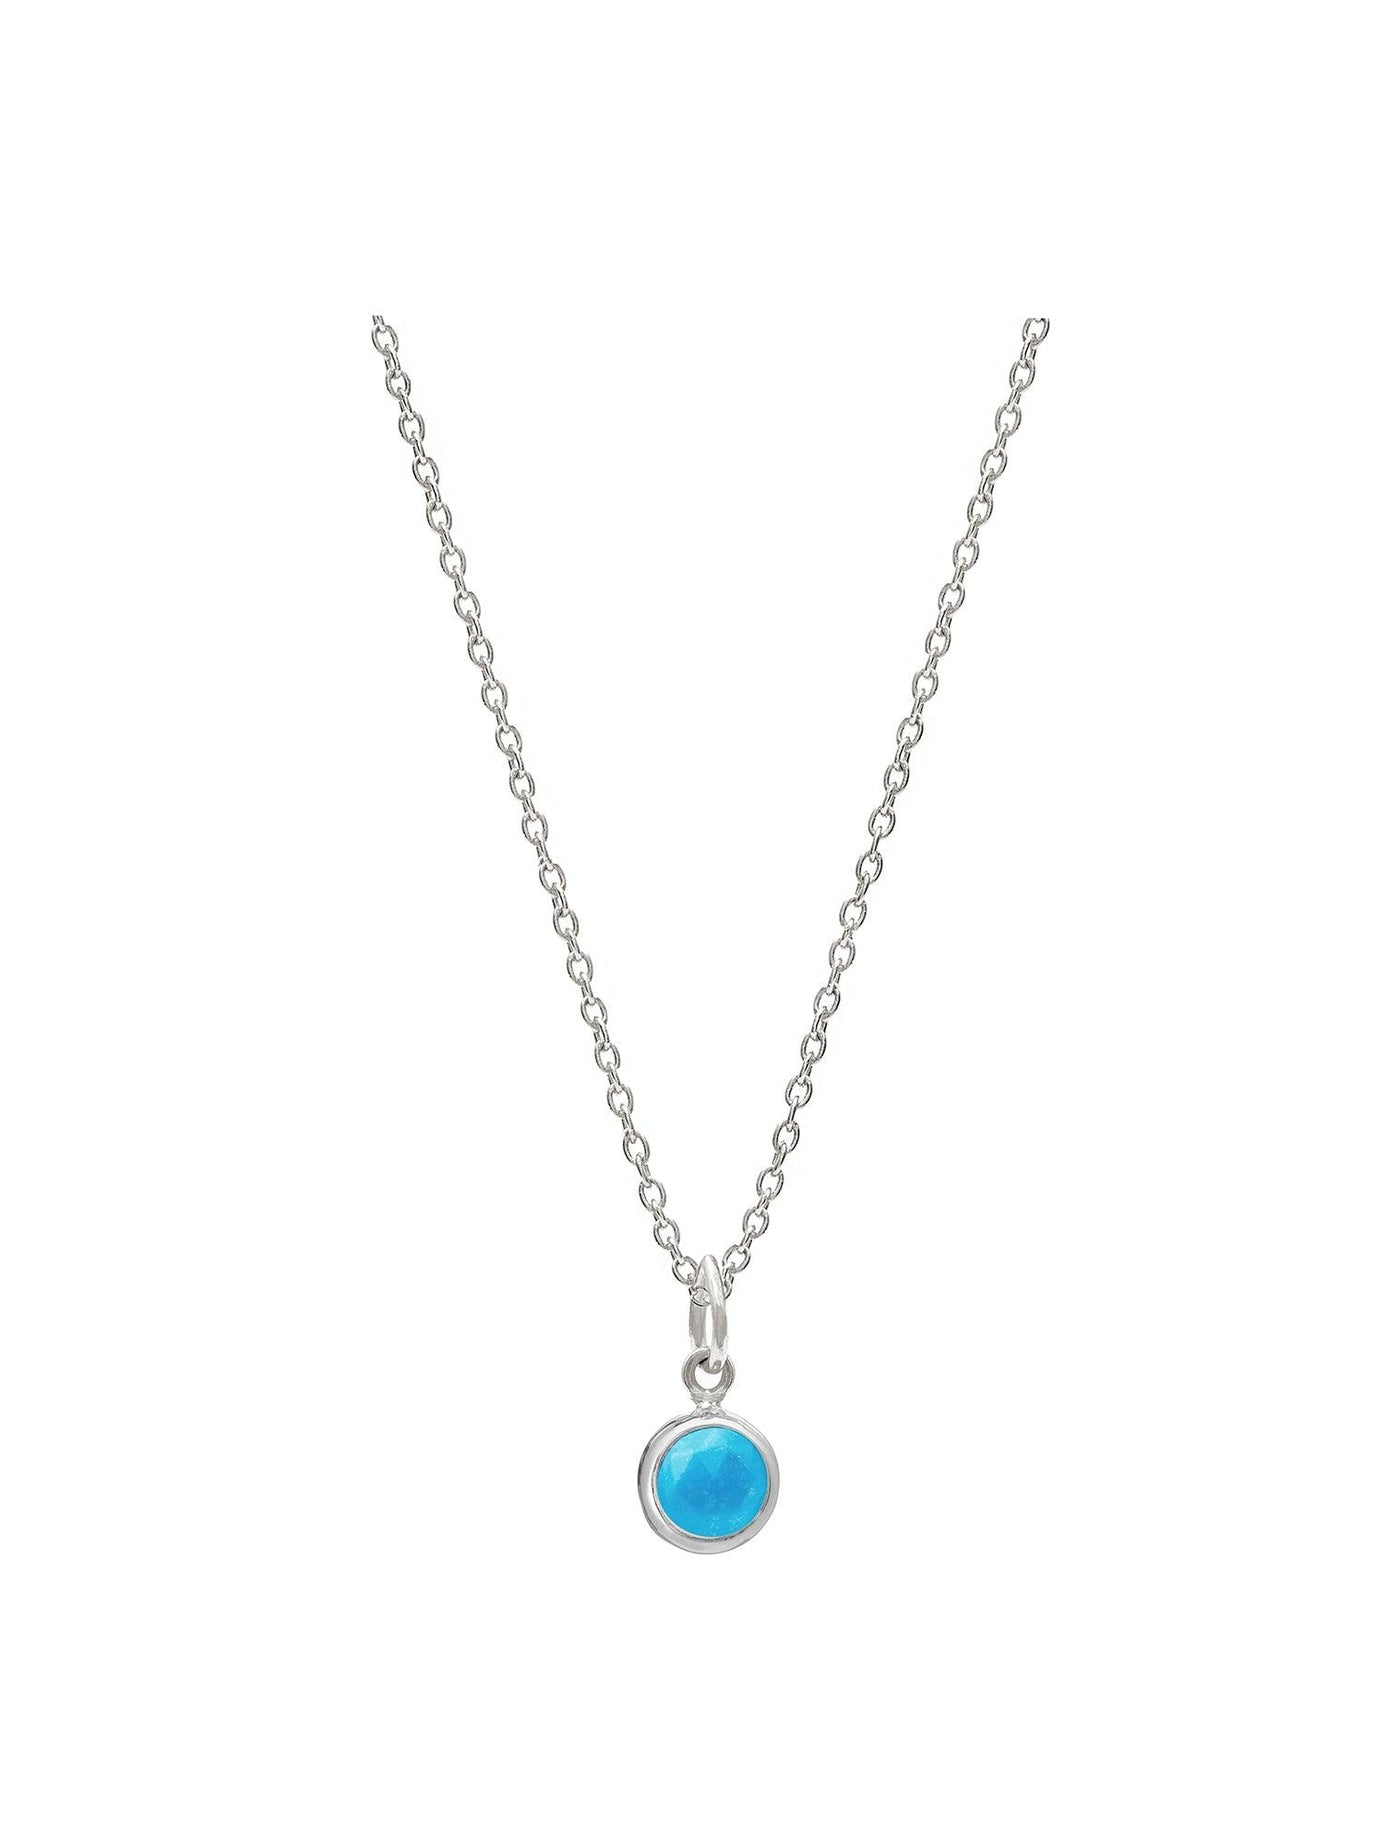 Luceir Turquoise Birthstone Necklace - Rococo Jewellery